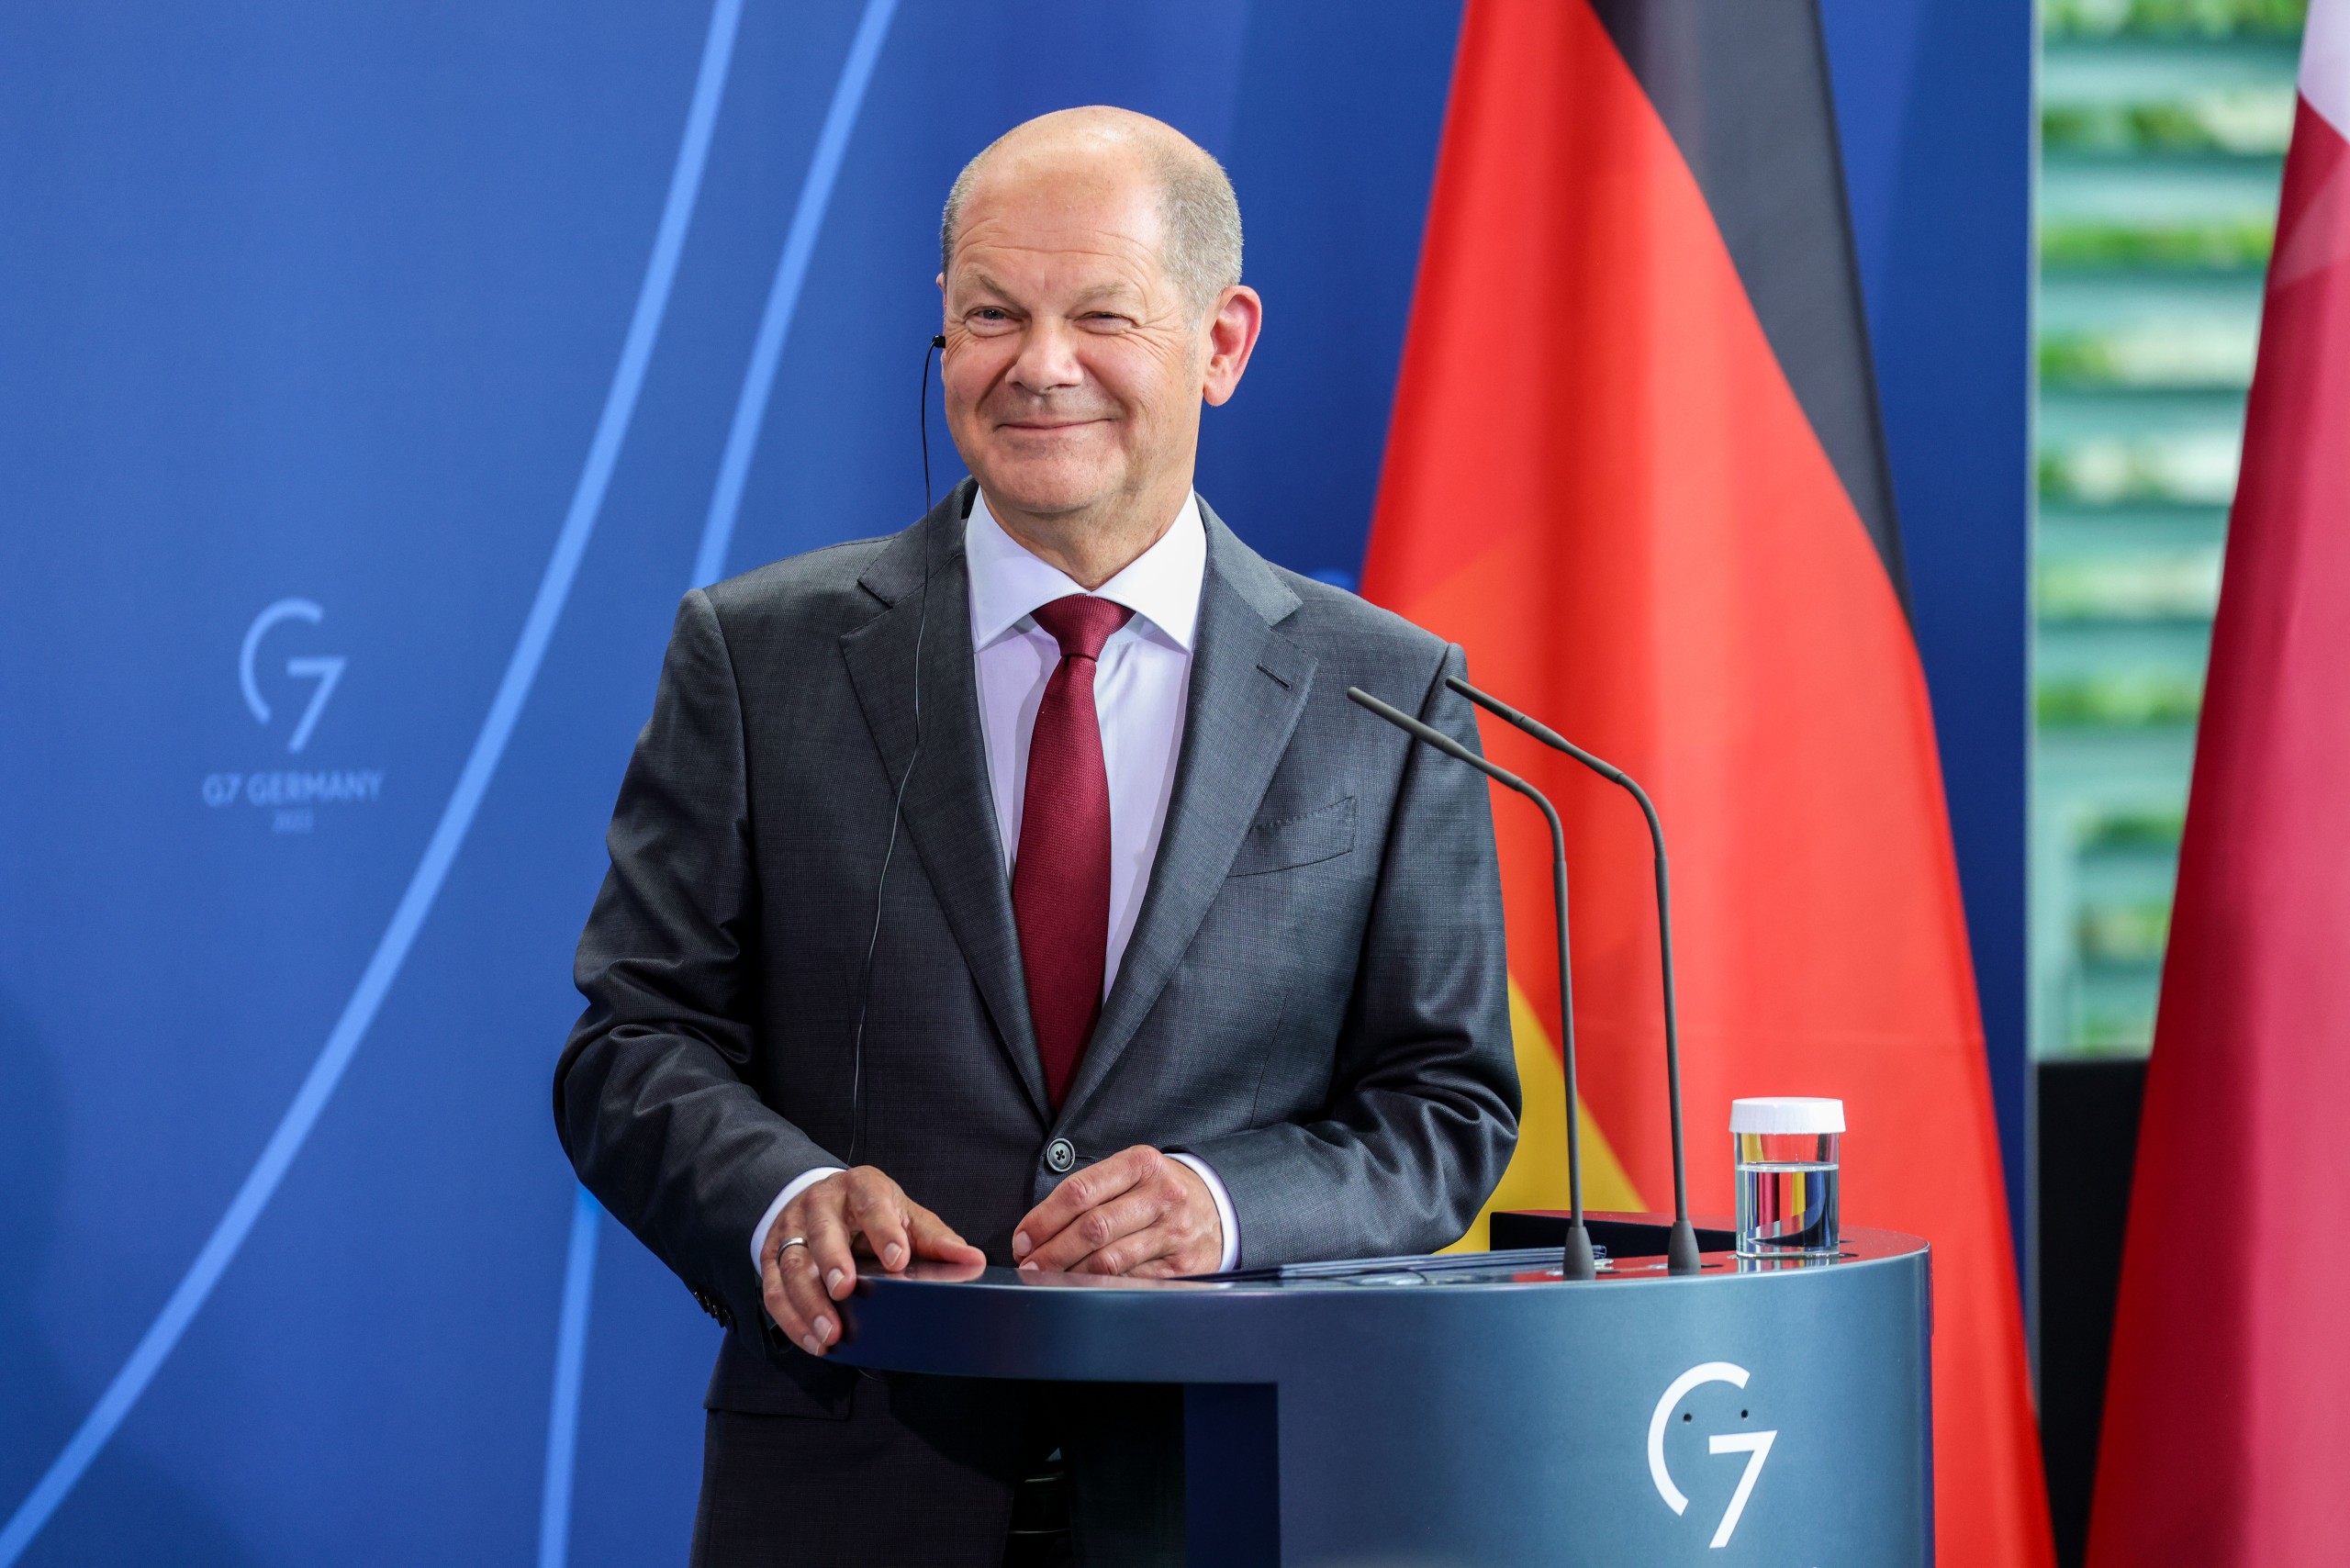 epa09960471 German Chancellor Olaf Scholz reacts during a joint press conference with Qatar's Emir Sheikh Tamim bin Hamad Al-Thani (not pictured), at the Chancellery in Berlin, Germany, 20 May 2022. Qatar and Germany signed earlier an energy partnership agreement. The Emir is on an official state visit to Germany.  EPA/OMER MESSINGER